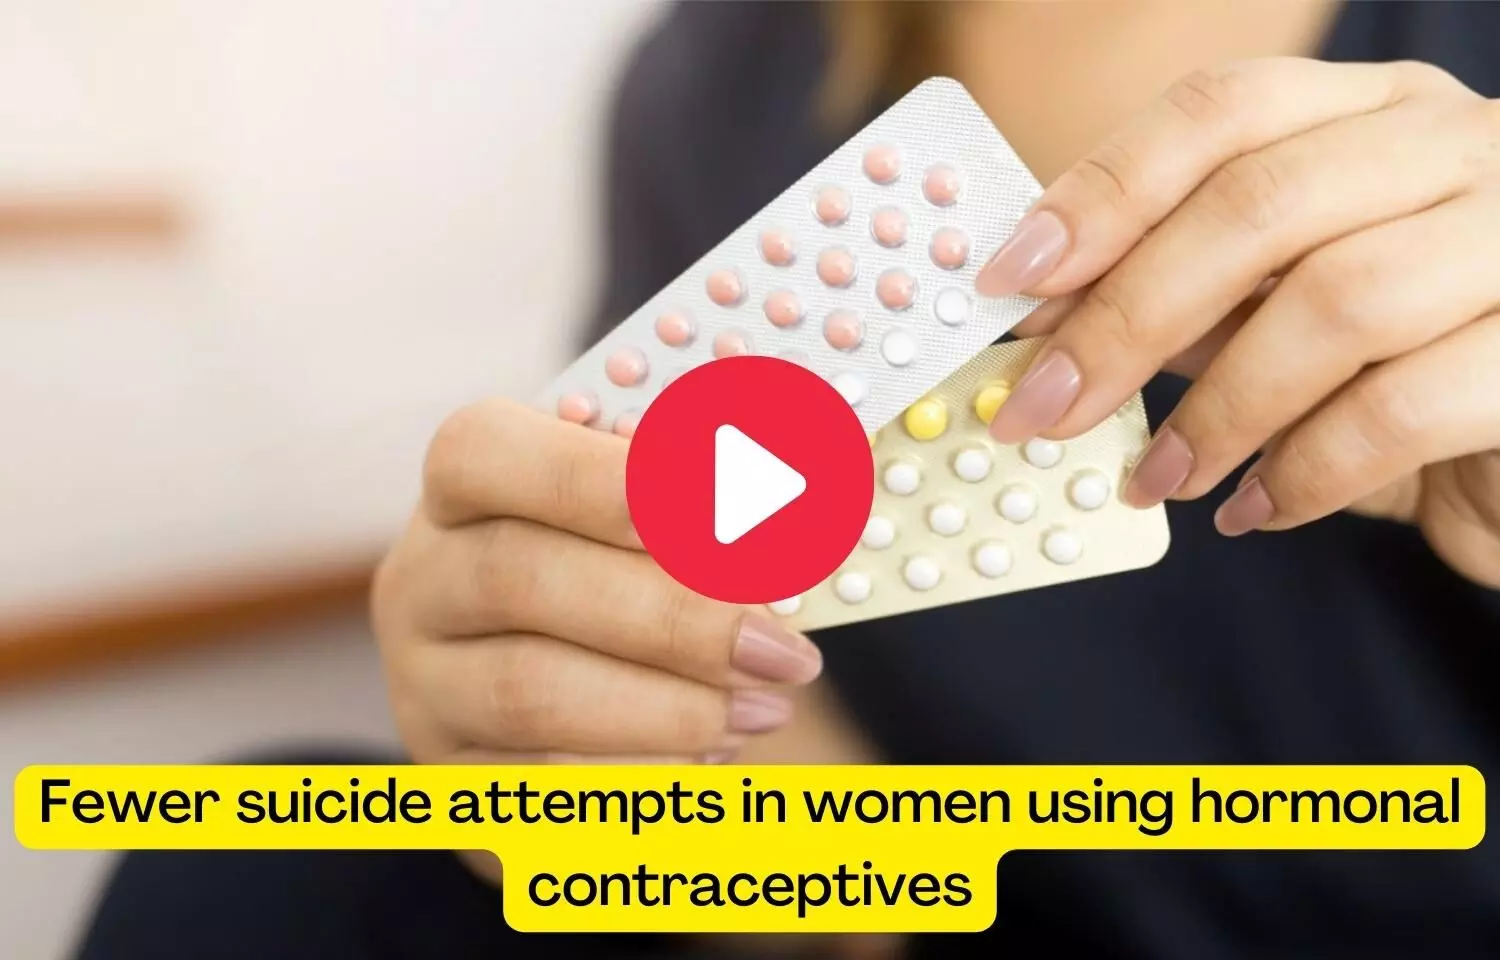 Fewer suicide attempts in women using hormonal contraceptives